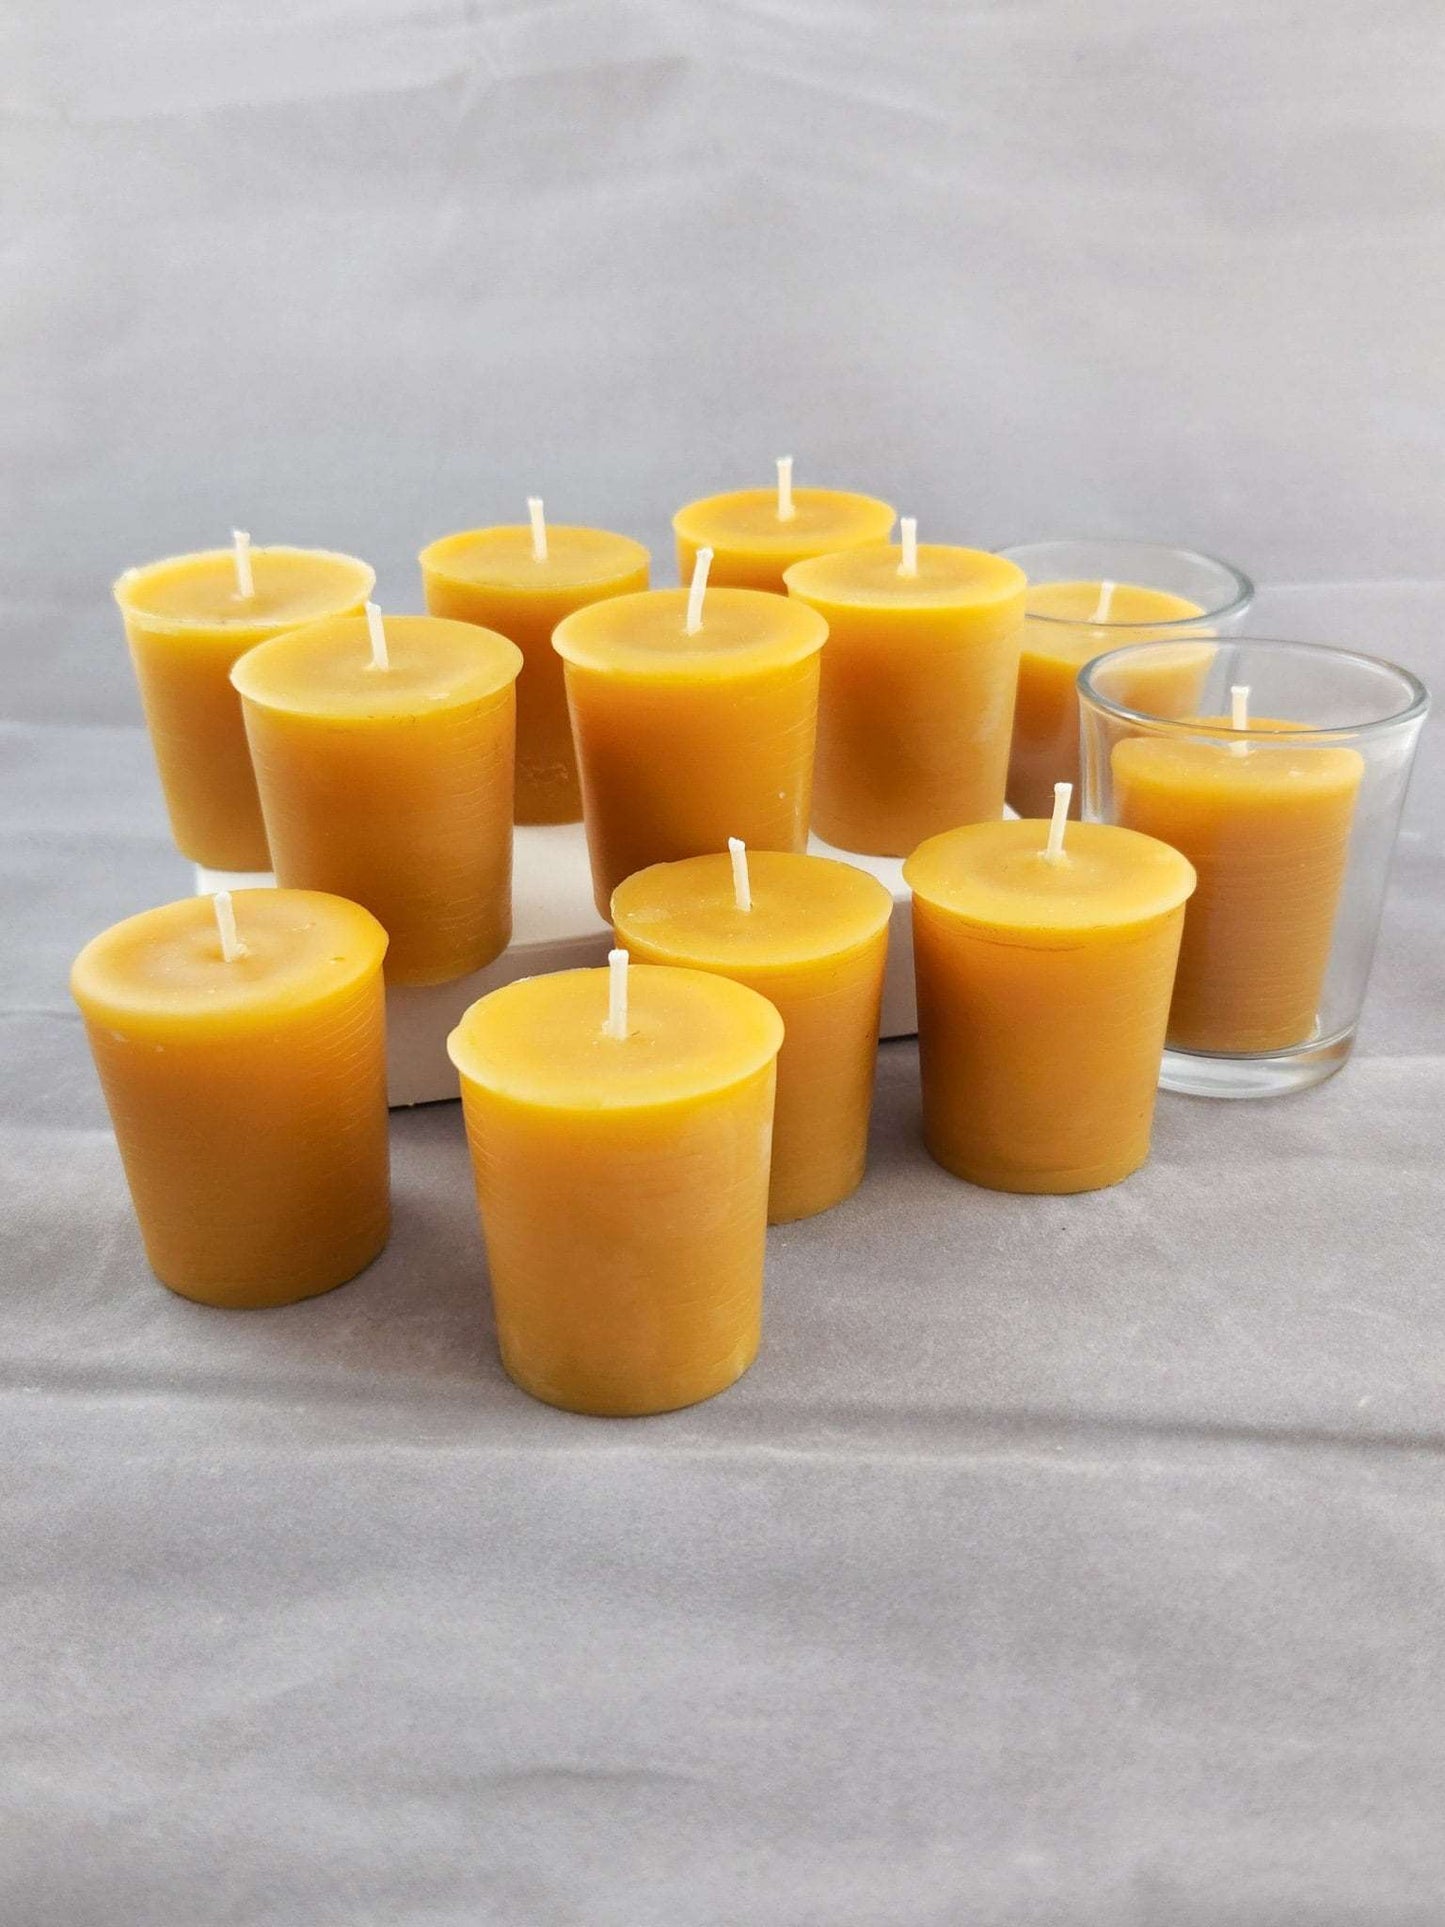 100% Beeswax Votive Candles | 4 | 6 | 12 | 48